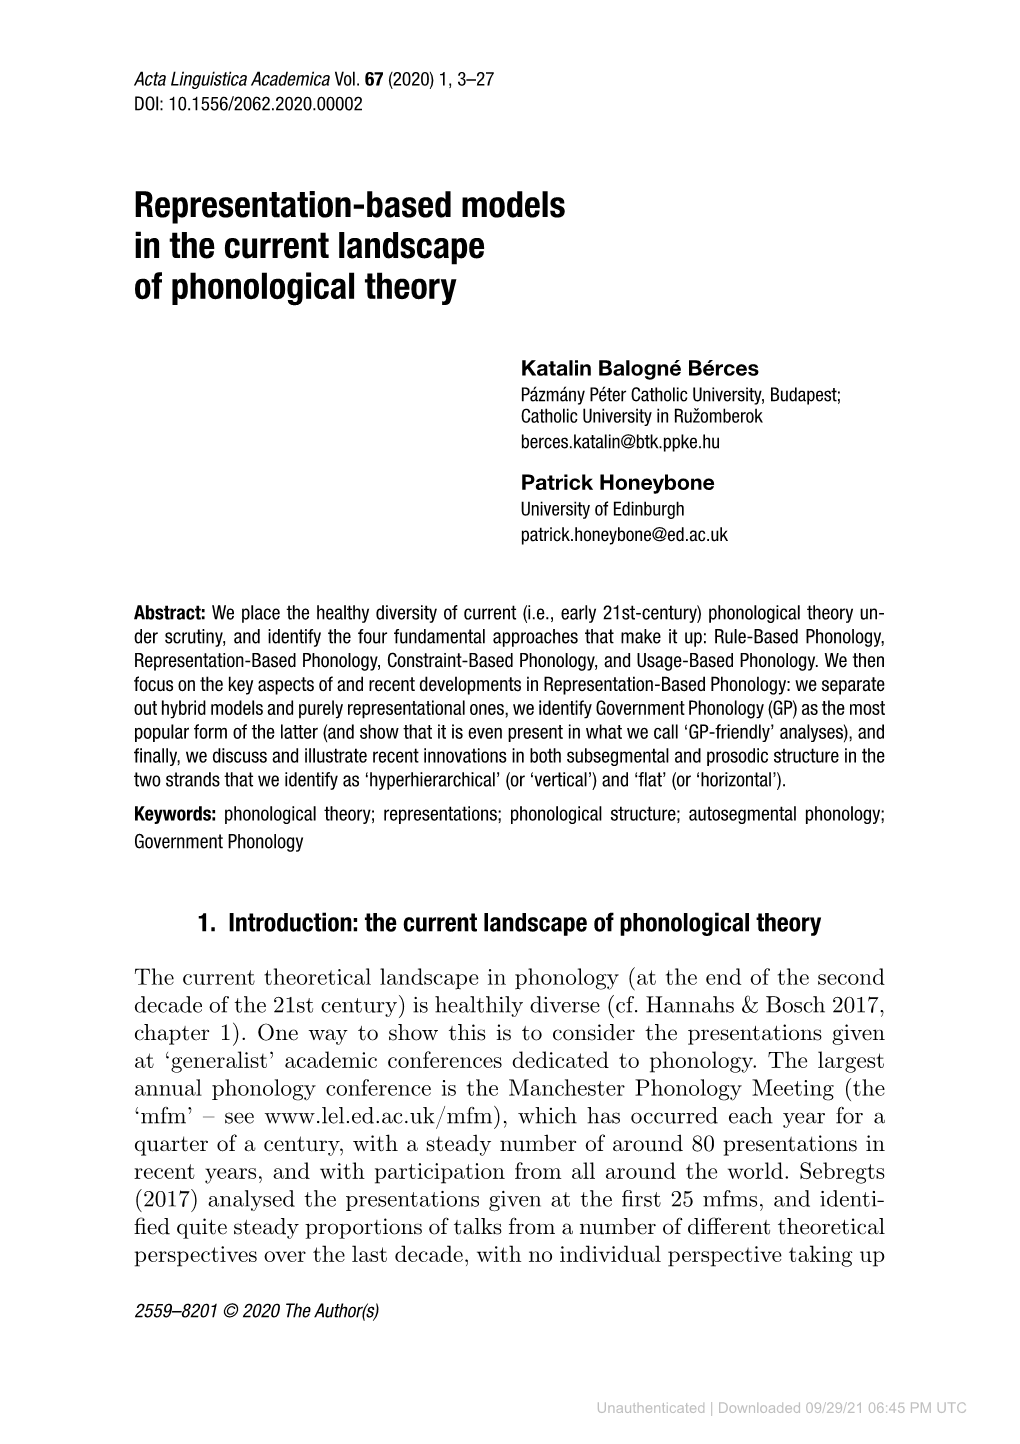 Representation-Based Models in the Current Landscape of Phonological Theory